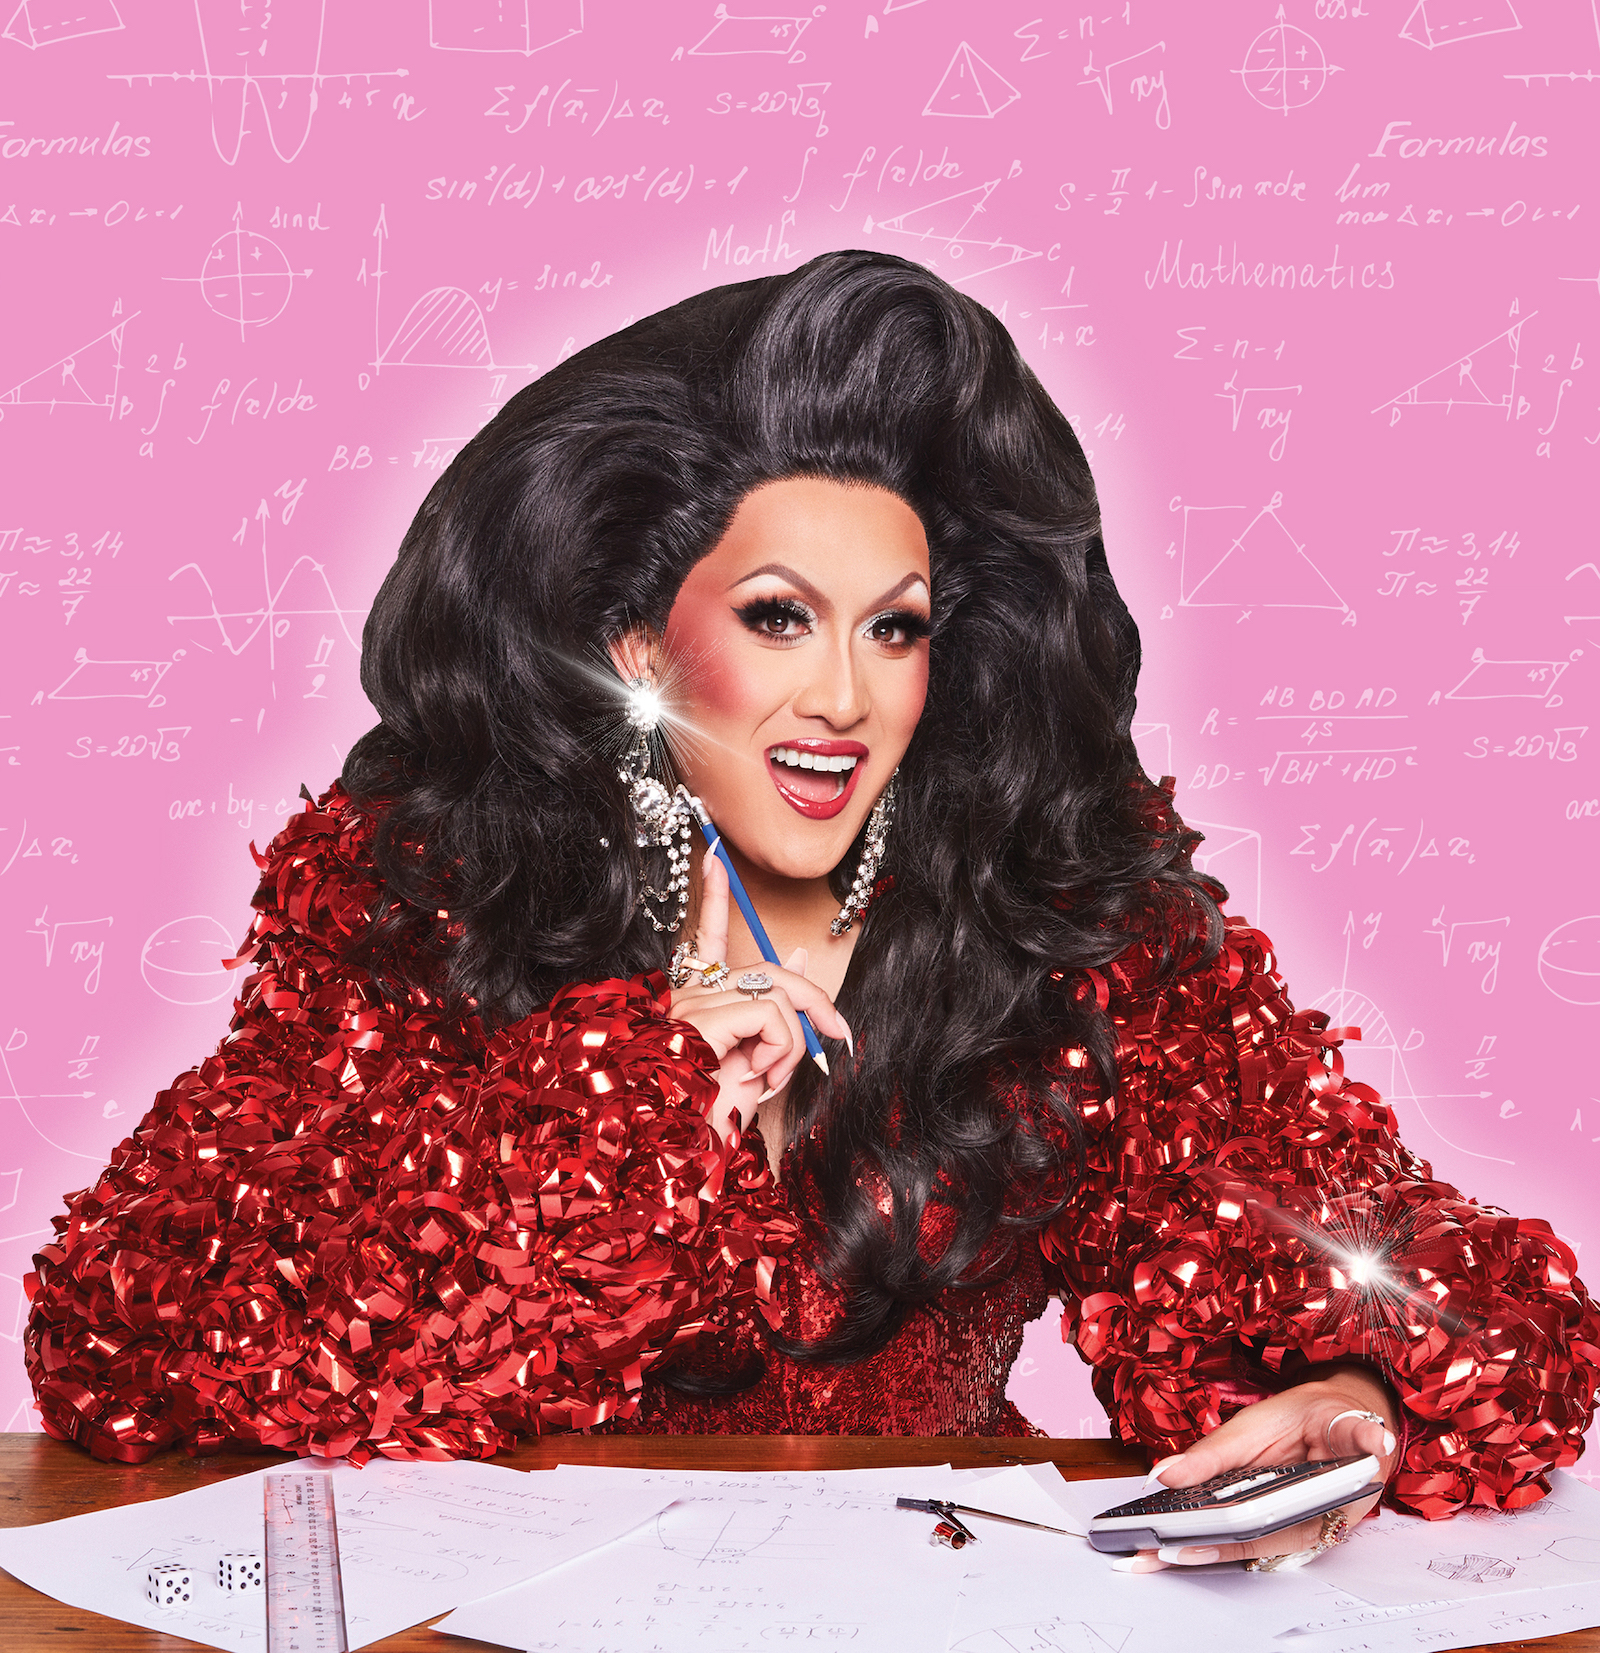 A drag queen wearing a shiny red shirt that looks like it's made of wrapping ribbons. She's smiling at the camera, holding a calculator and a pencil. Behind her are math equations and formulas.